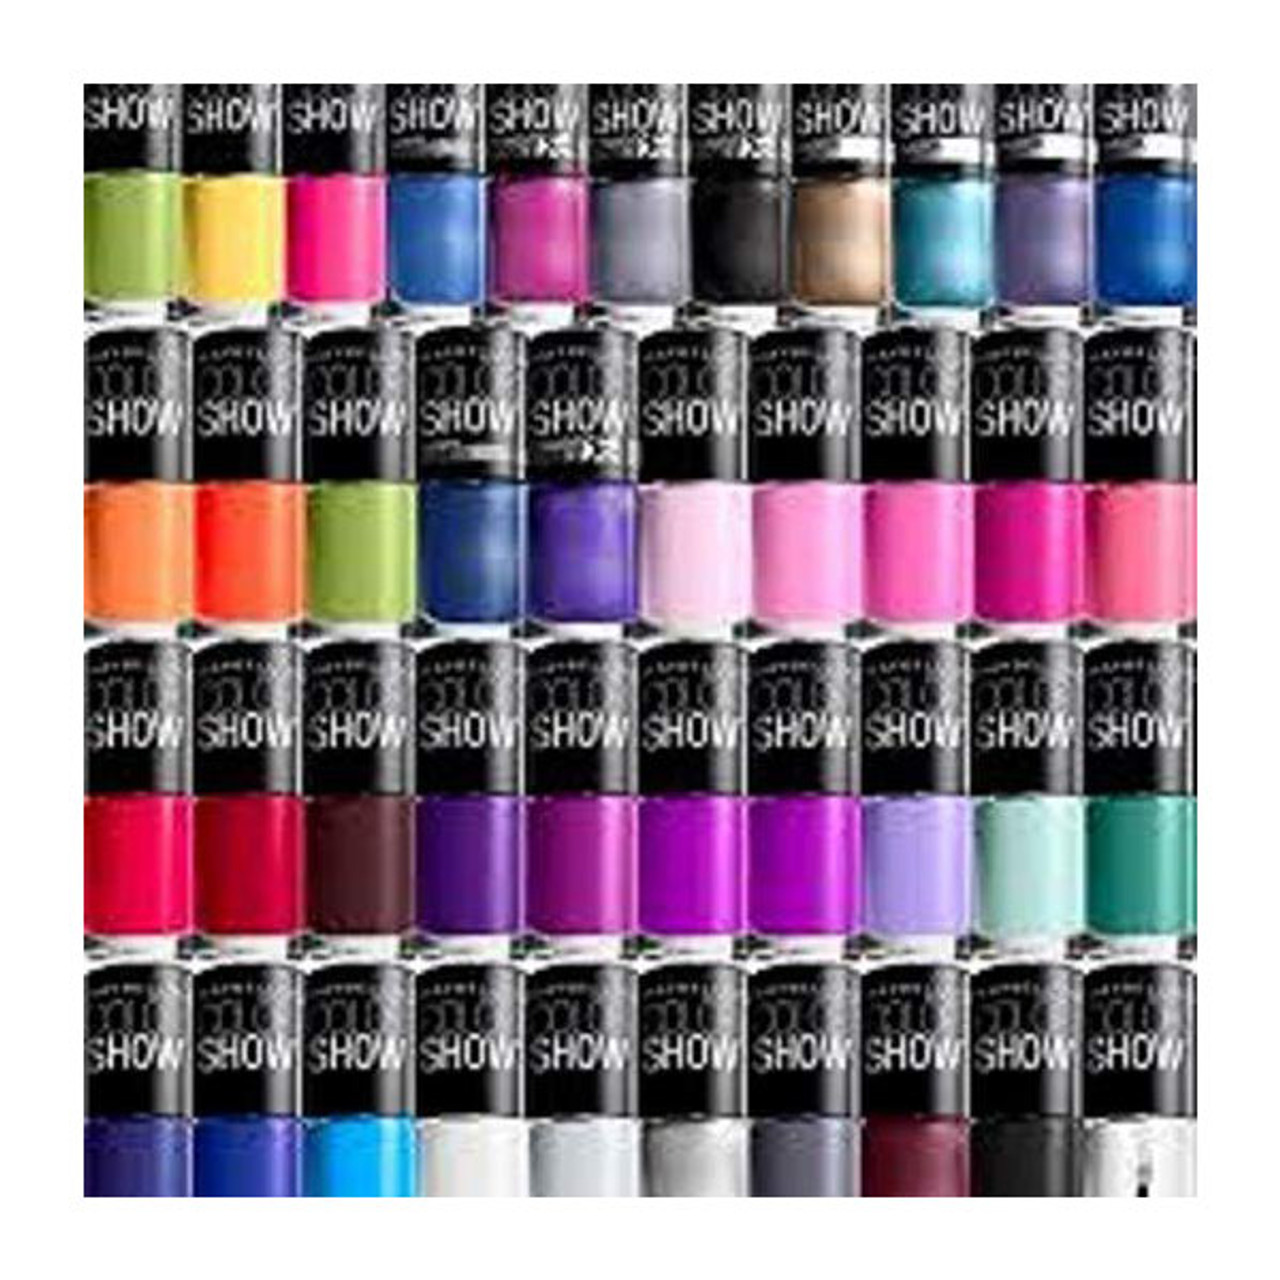 Maybelline Color Show Nail Polish in Assorted Colors (10-Pack) product image